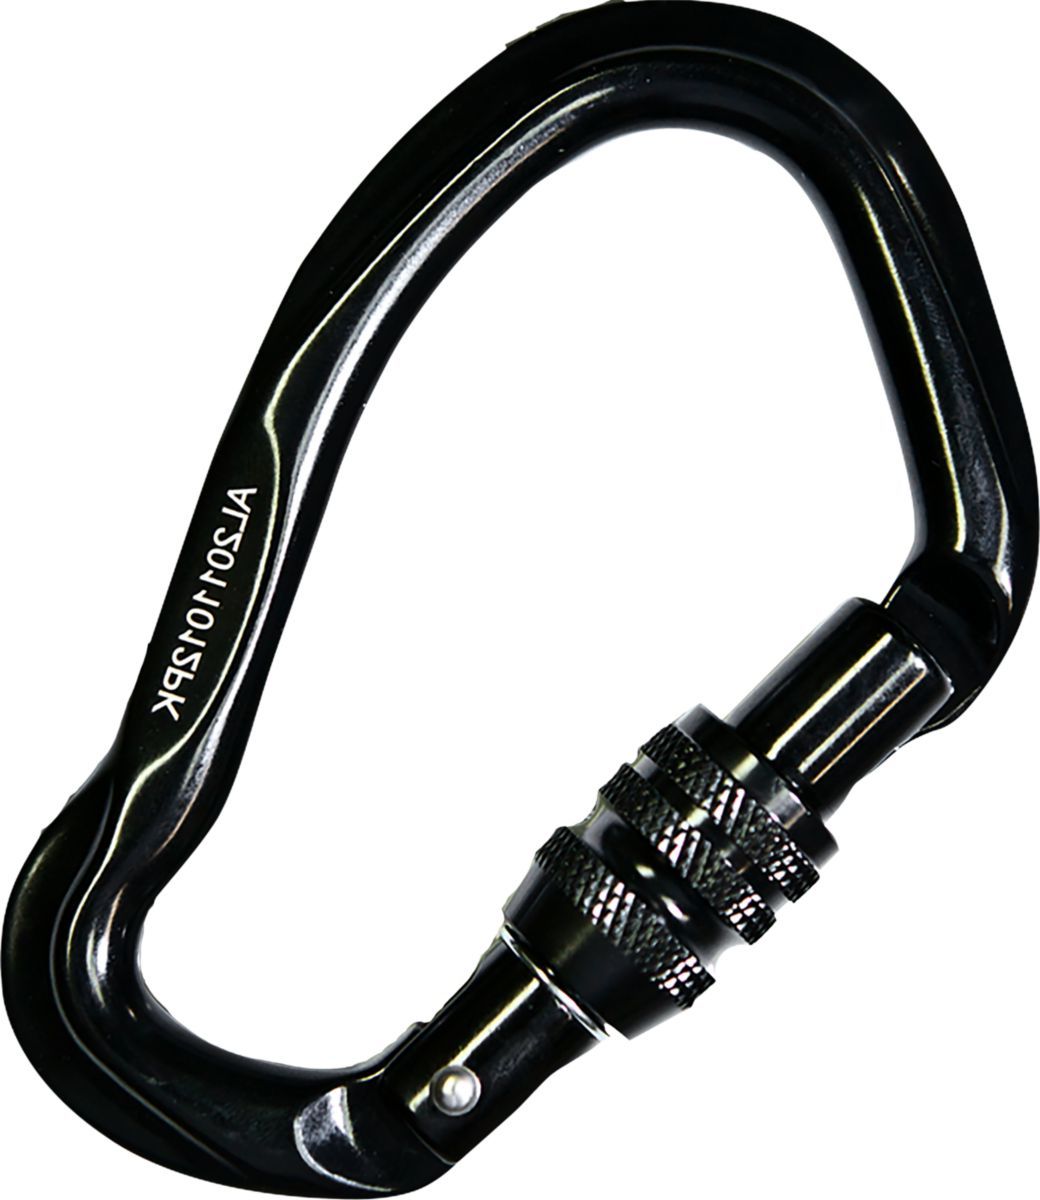 Muddy® The Safety Harness Carabiner